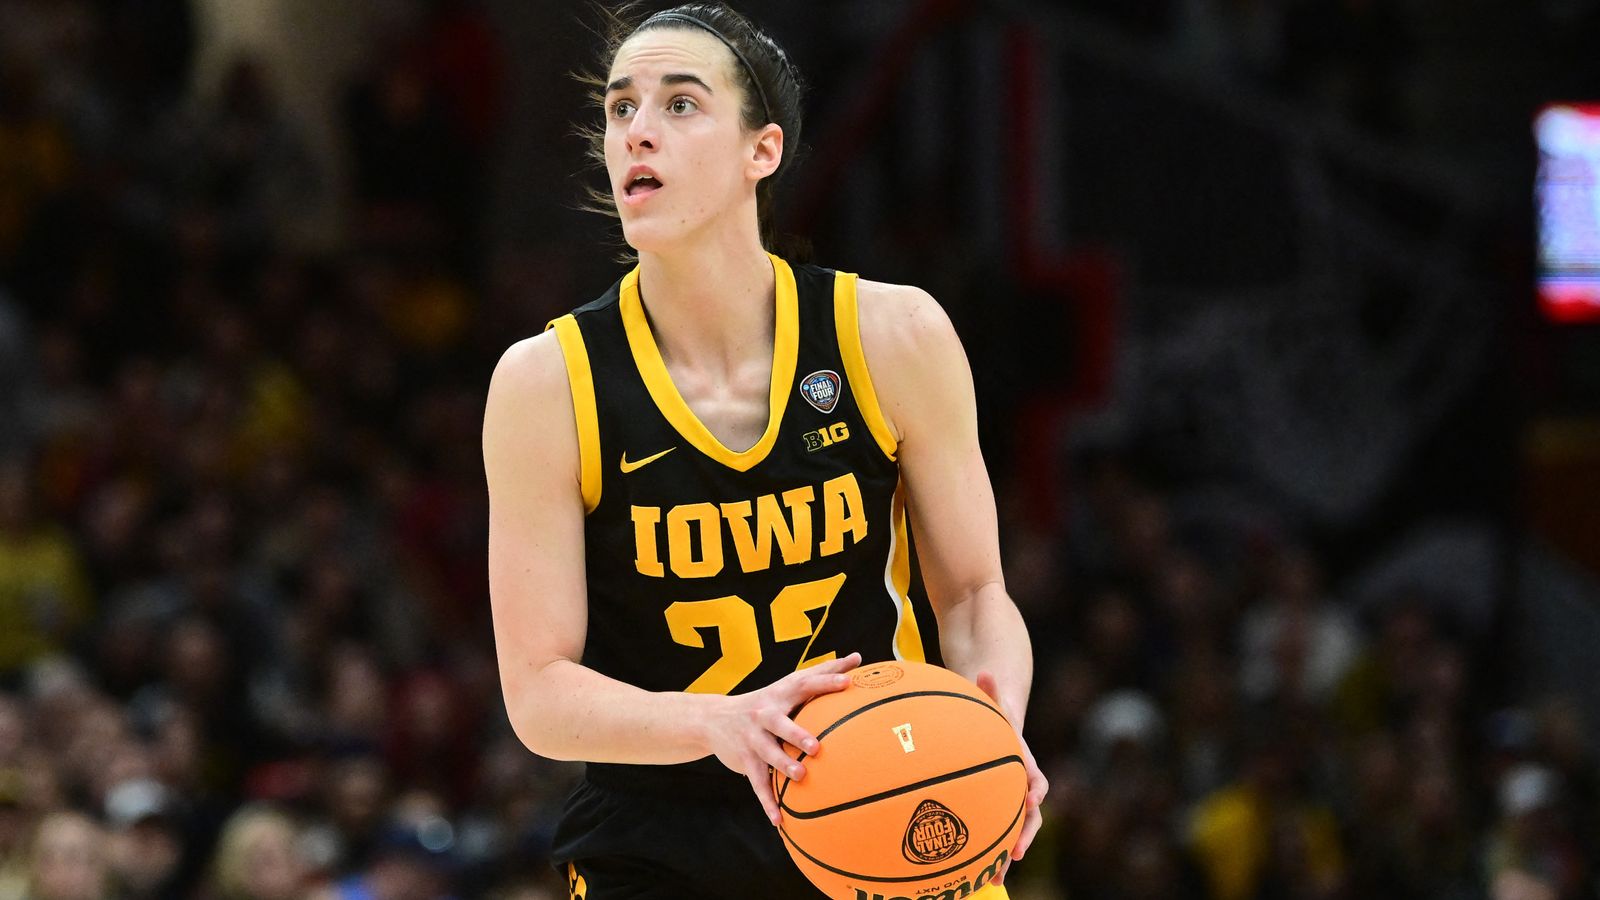 Who is Caitlin Clark? The college star who has transformed women's basketball